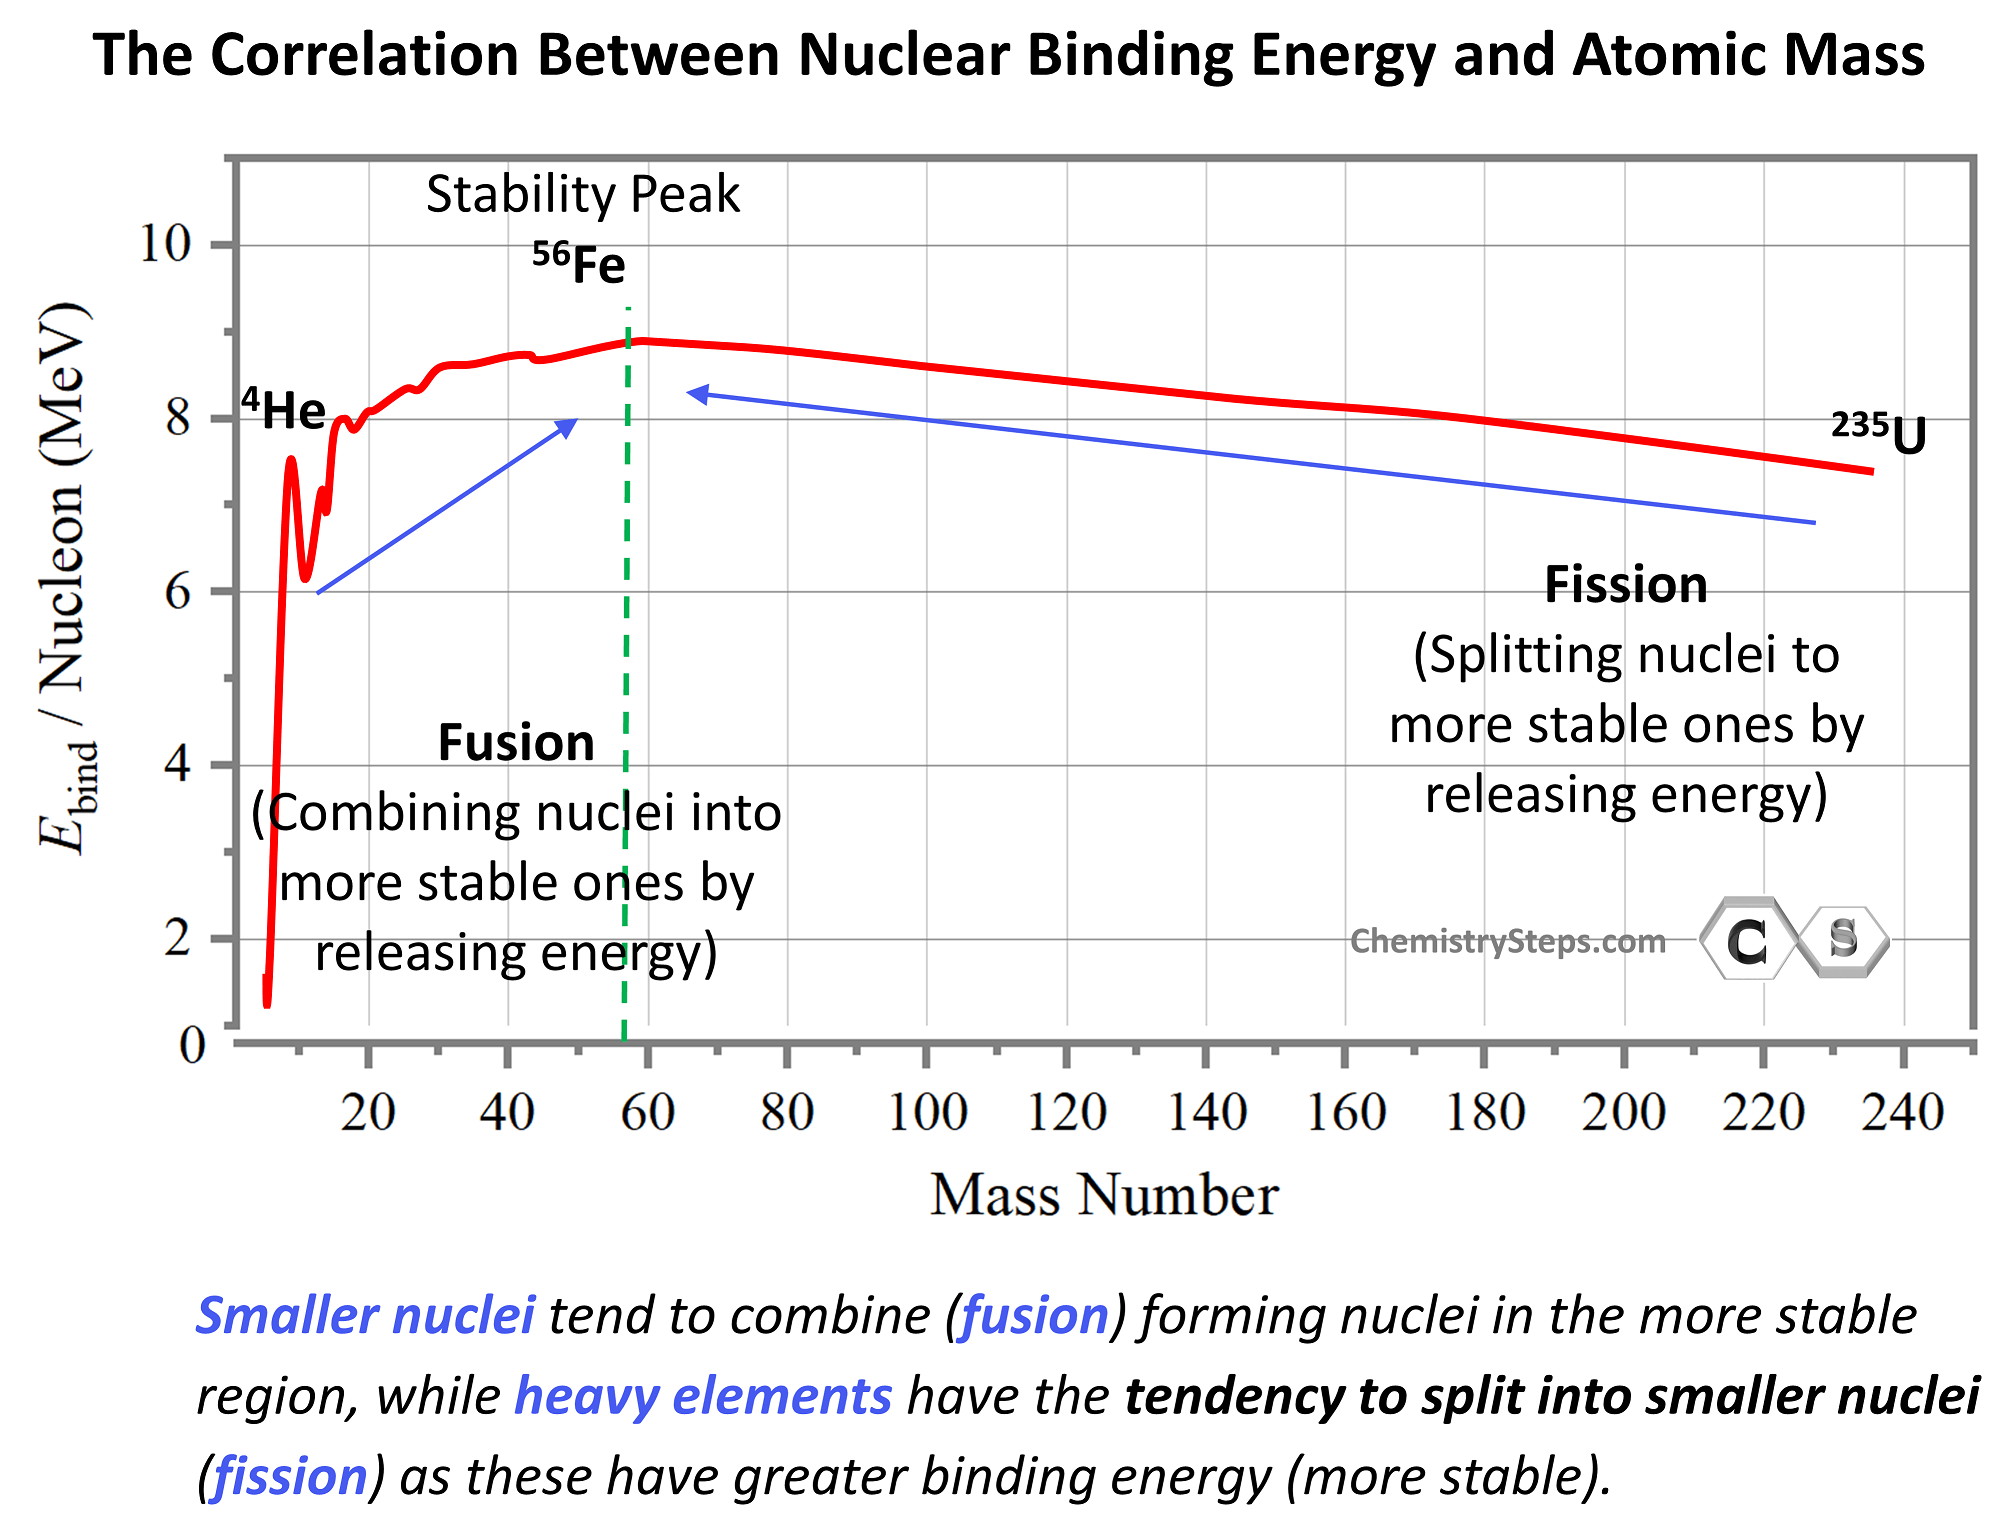 The Correlation Between Nuclear Binding Energy and Atomic Mass